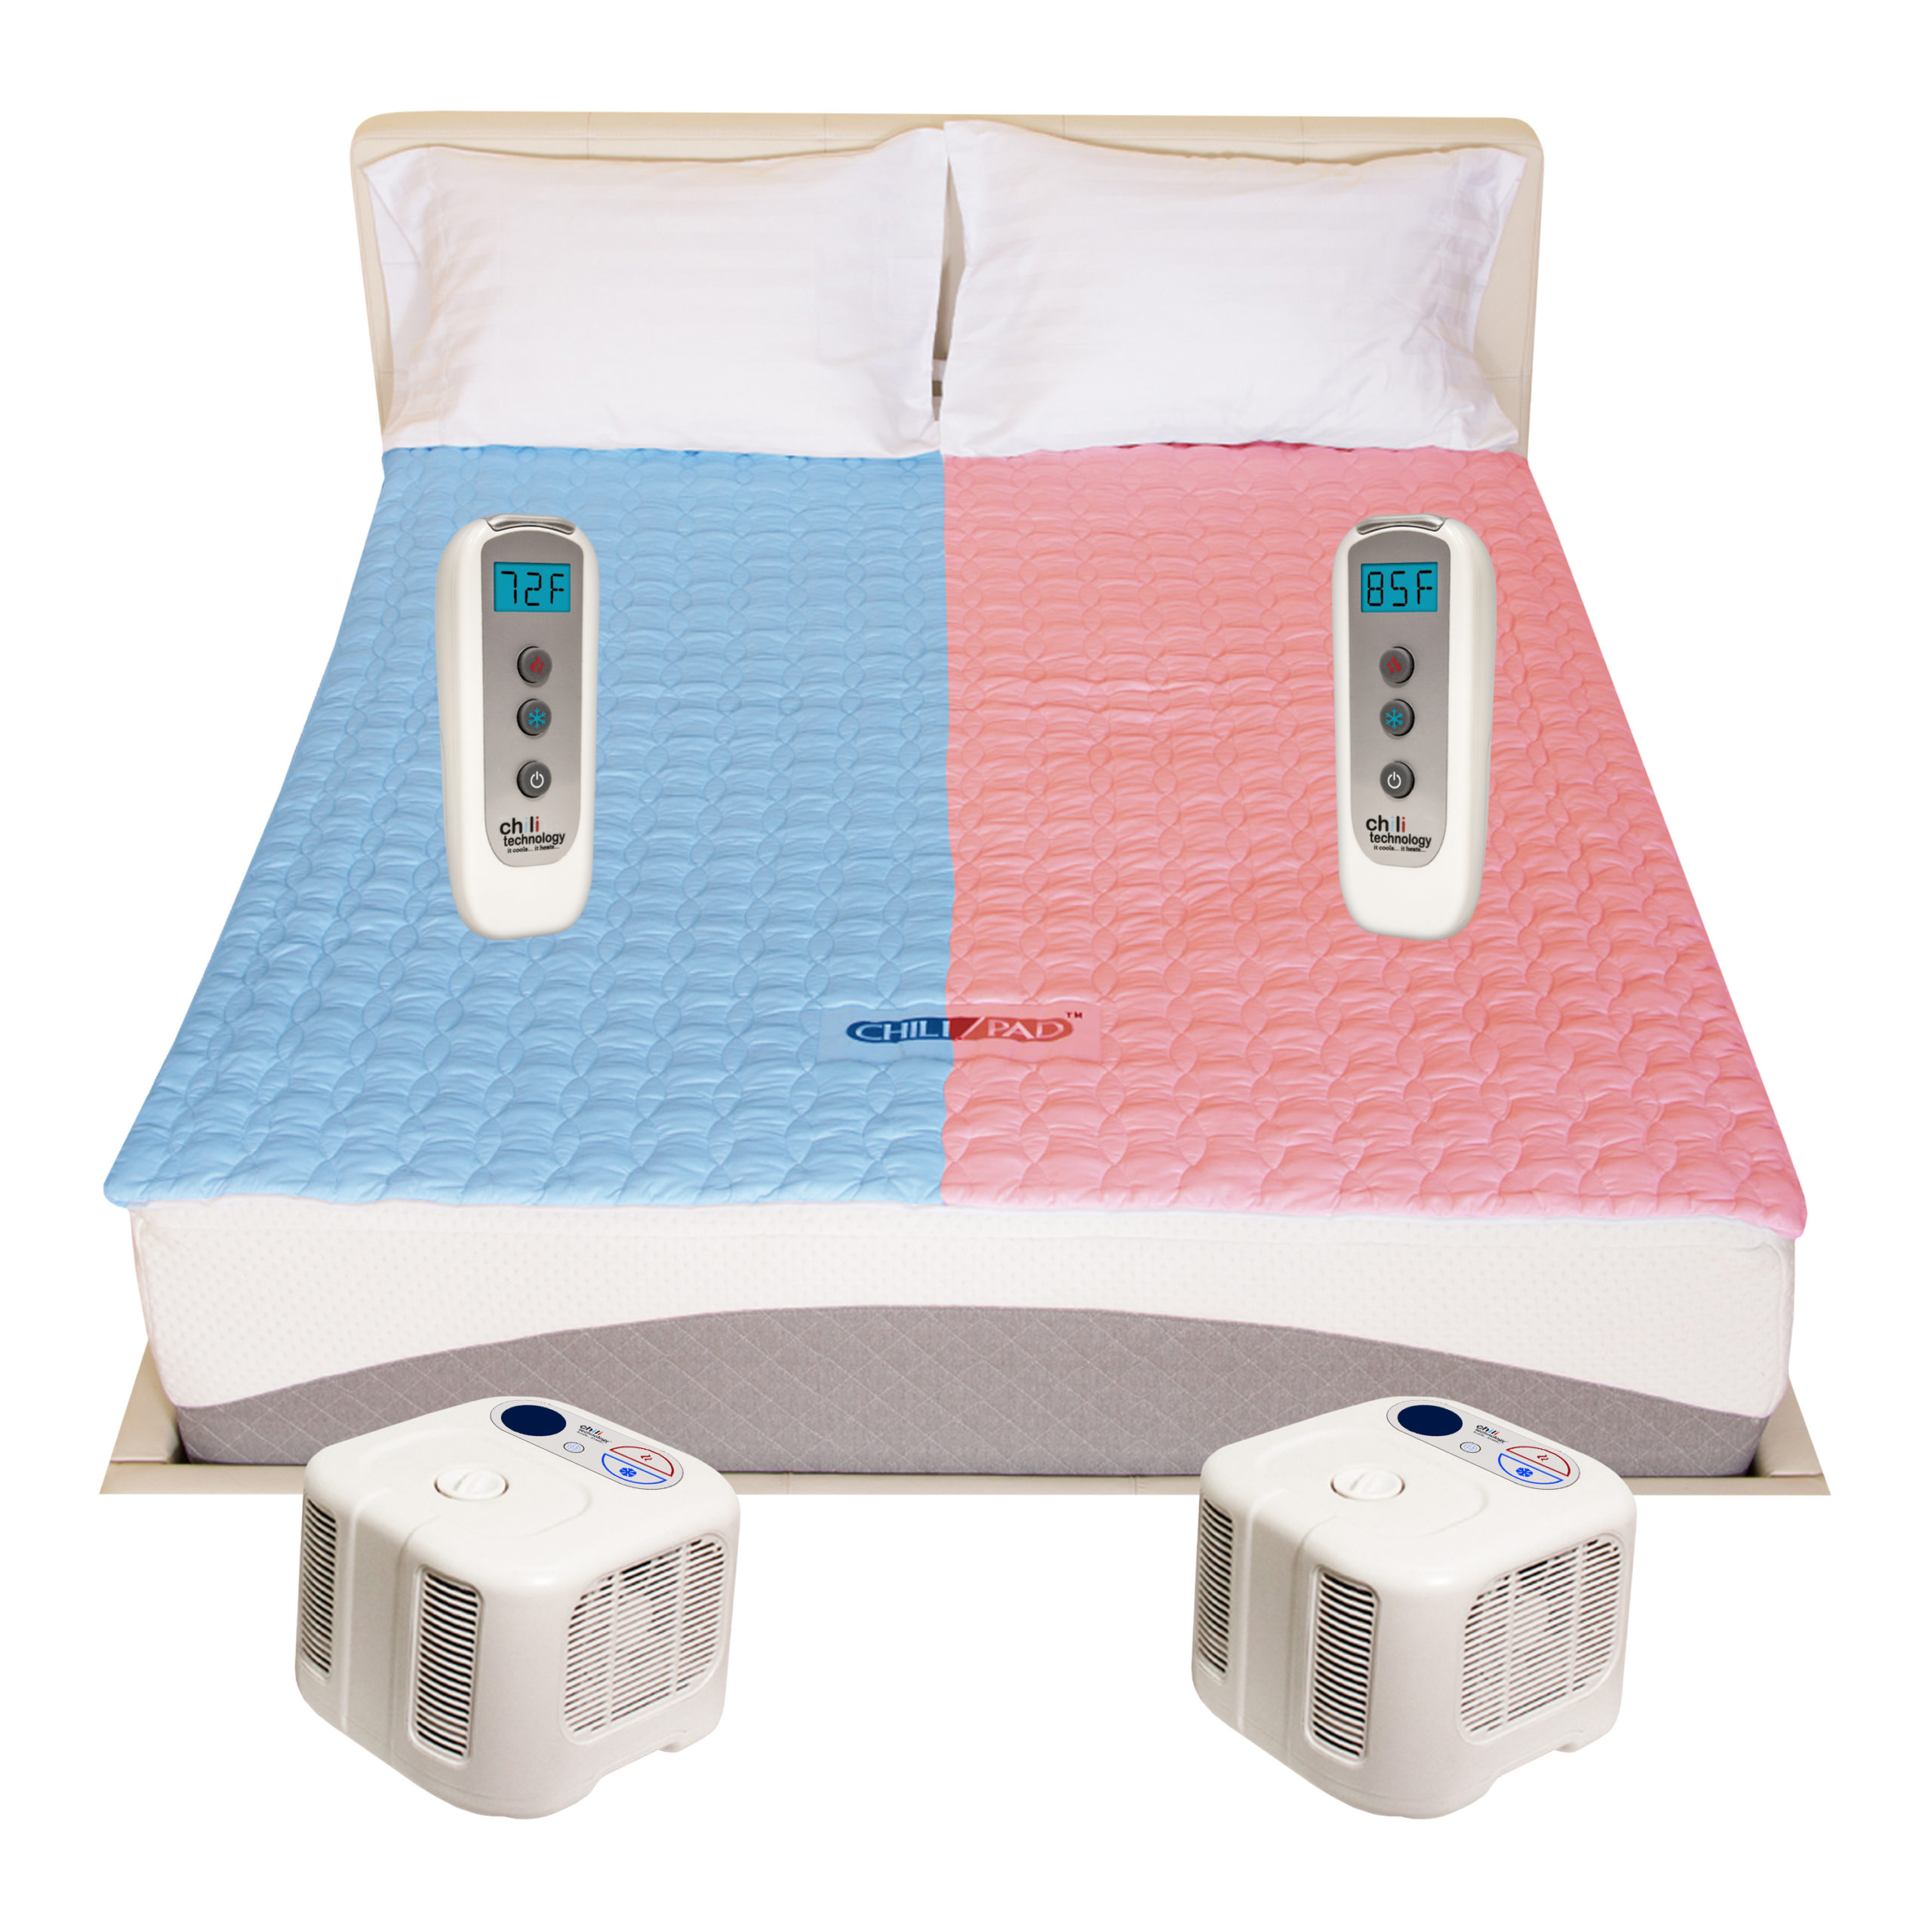 How to Sleep in a Hot Room - Chilipad|Temperature|Mattress|Cube|Sleep|Bed|Water|System|Pad|Ooler|Control|Unit|Night|Bedjet|Technology|Side|Air|Product|Review|Body|Time|Degrees|Noise|Price|Pod|Tubes|Heat|Device|Cooling|Room|King|App|Features|Size|Cover|Sleepers|Sheets|Energy|Warranty|Quality|Mattress Pad|Control Unit|Cube Sleep System|Sleep Pod|Distilled Water|Remote Control|Sleep System|Desired Temperature|Water Tank|Chilipad Cube|Chili Technology|Deep Sleep|Pro Cover|Ooler Sleep System|Hydrogen Peroxide|Cool Mesh|Sleep Temperature|Fitted Sheet|Pod Pro|Sleep Quality|Smartphone App|Sleep Systems|Chilipad Sleep System|New Mattress|Sleep Trial|Full Refund|Mattress Topper|Body Heat|Air Flow|Chilipad Review